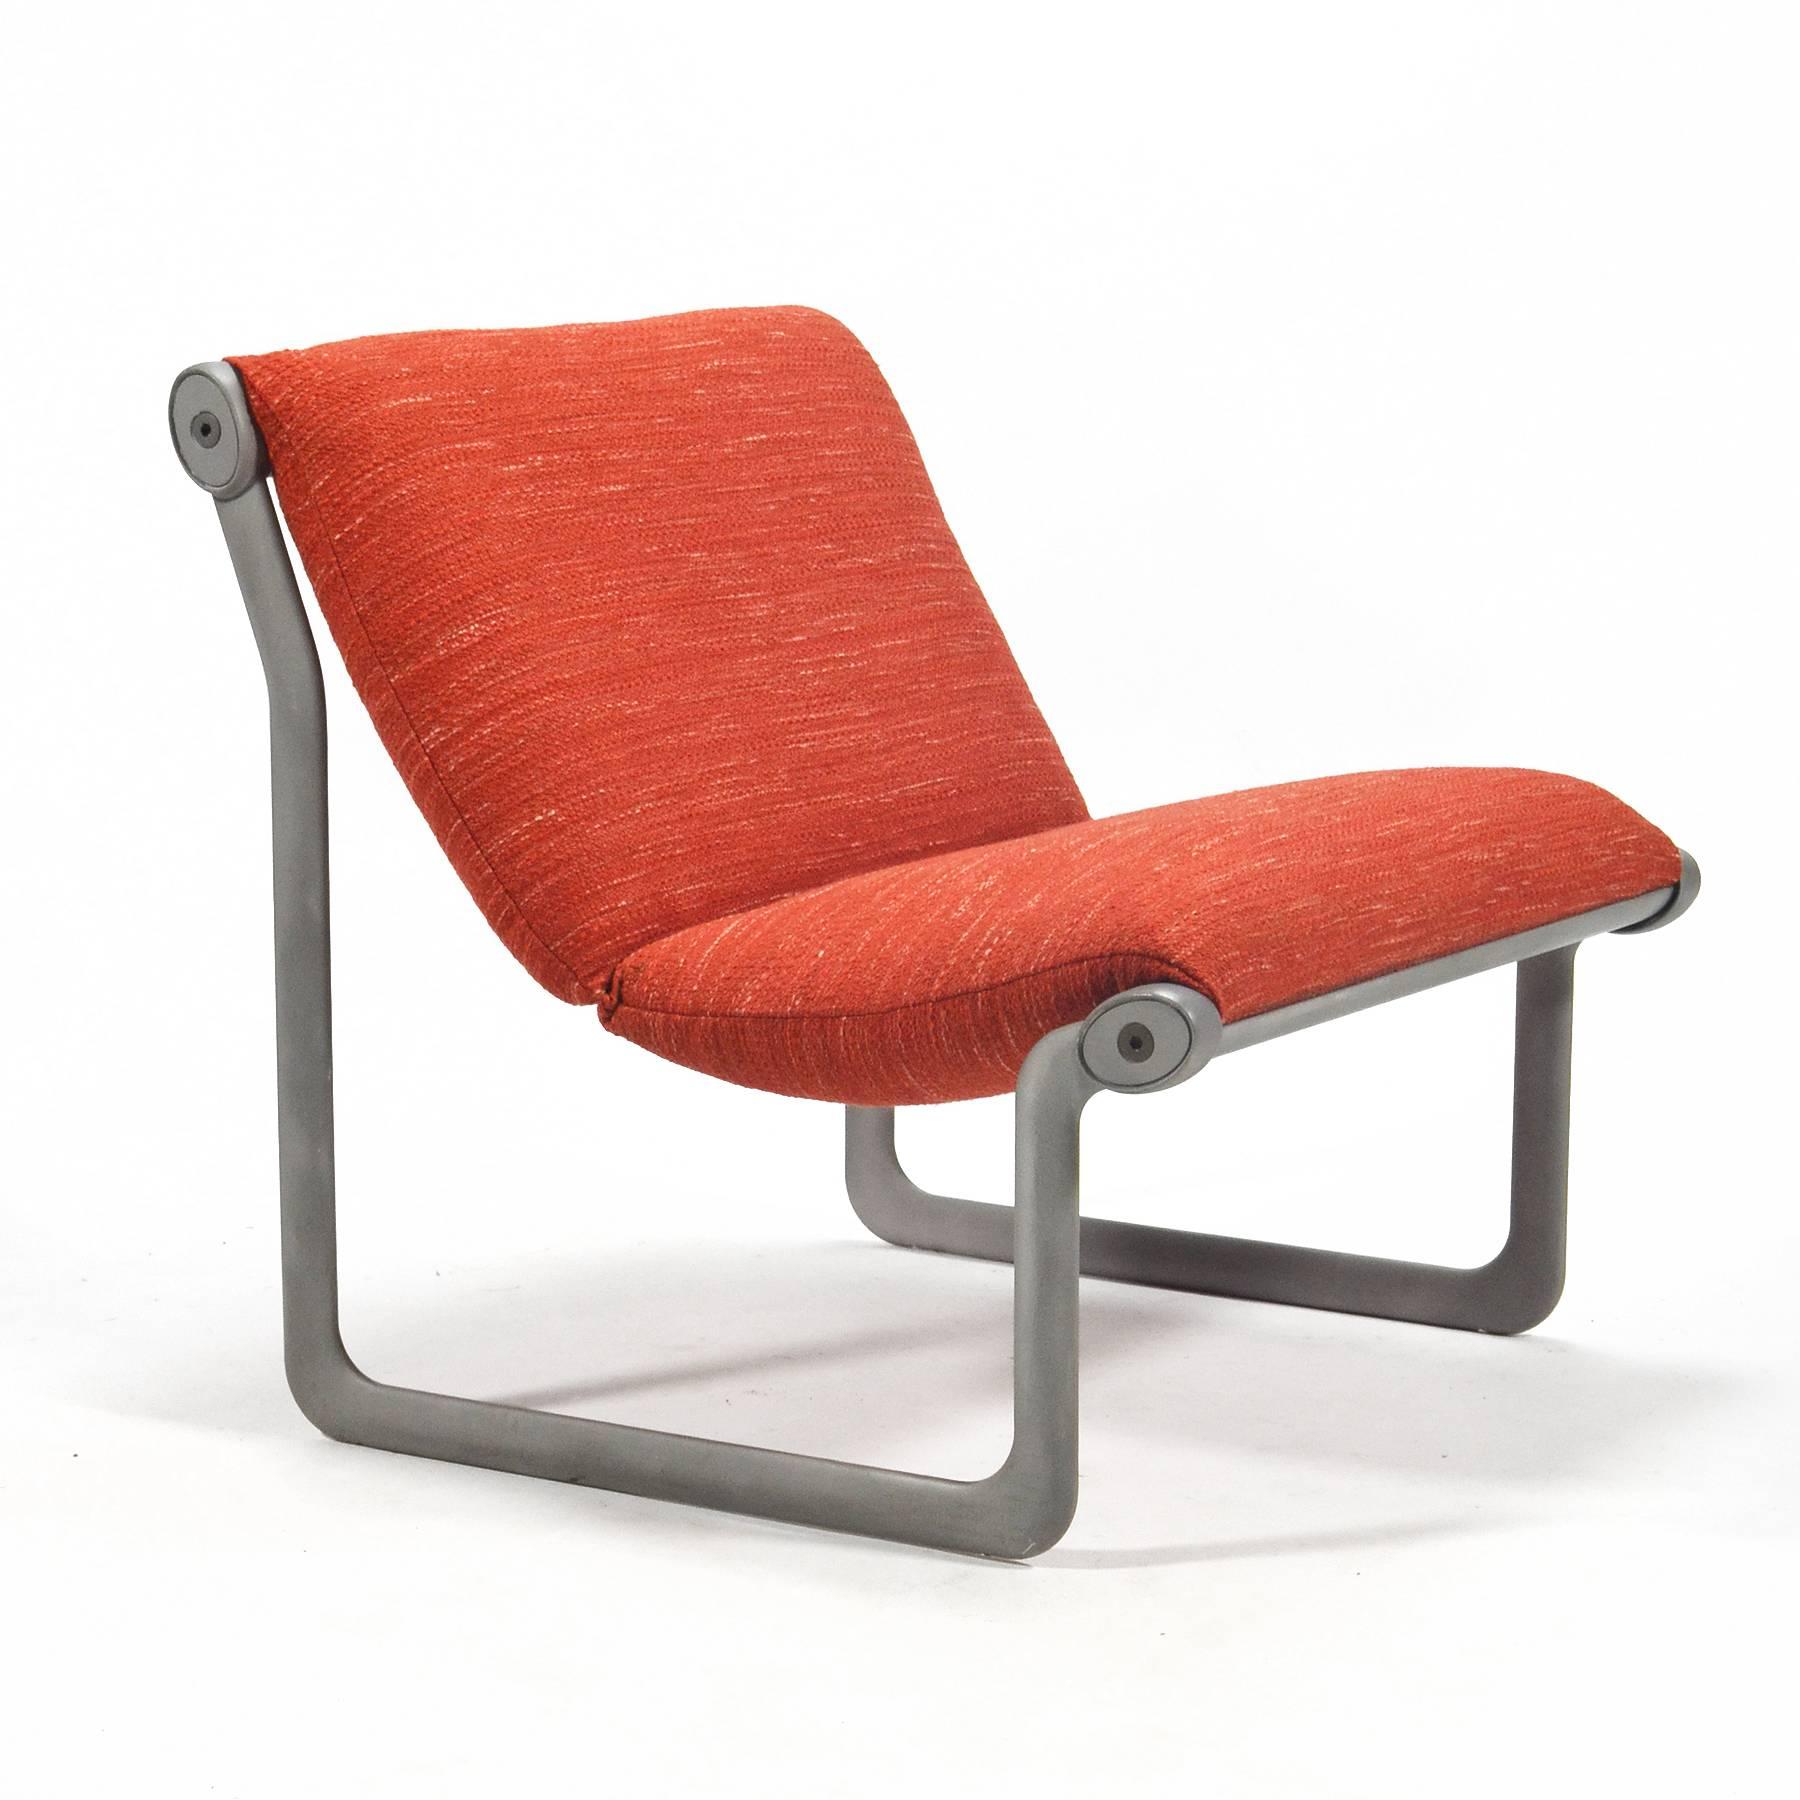 An innovative chair designed in 1971 by Bruce Hannah and Andrew Morrison for Knoll, the sling seat is suspended by a cast aluminum frame. We have three or four lounge chairs and one two seat sofa available which can be upholstered in the fabric of